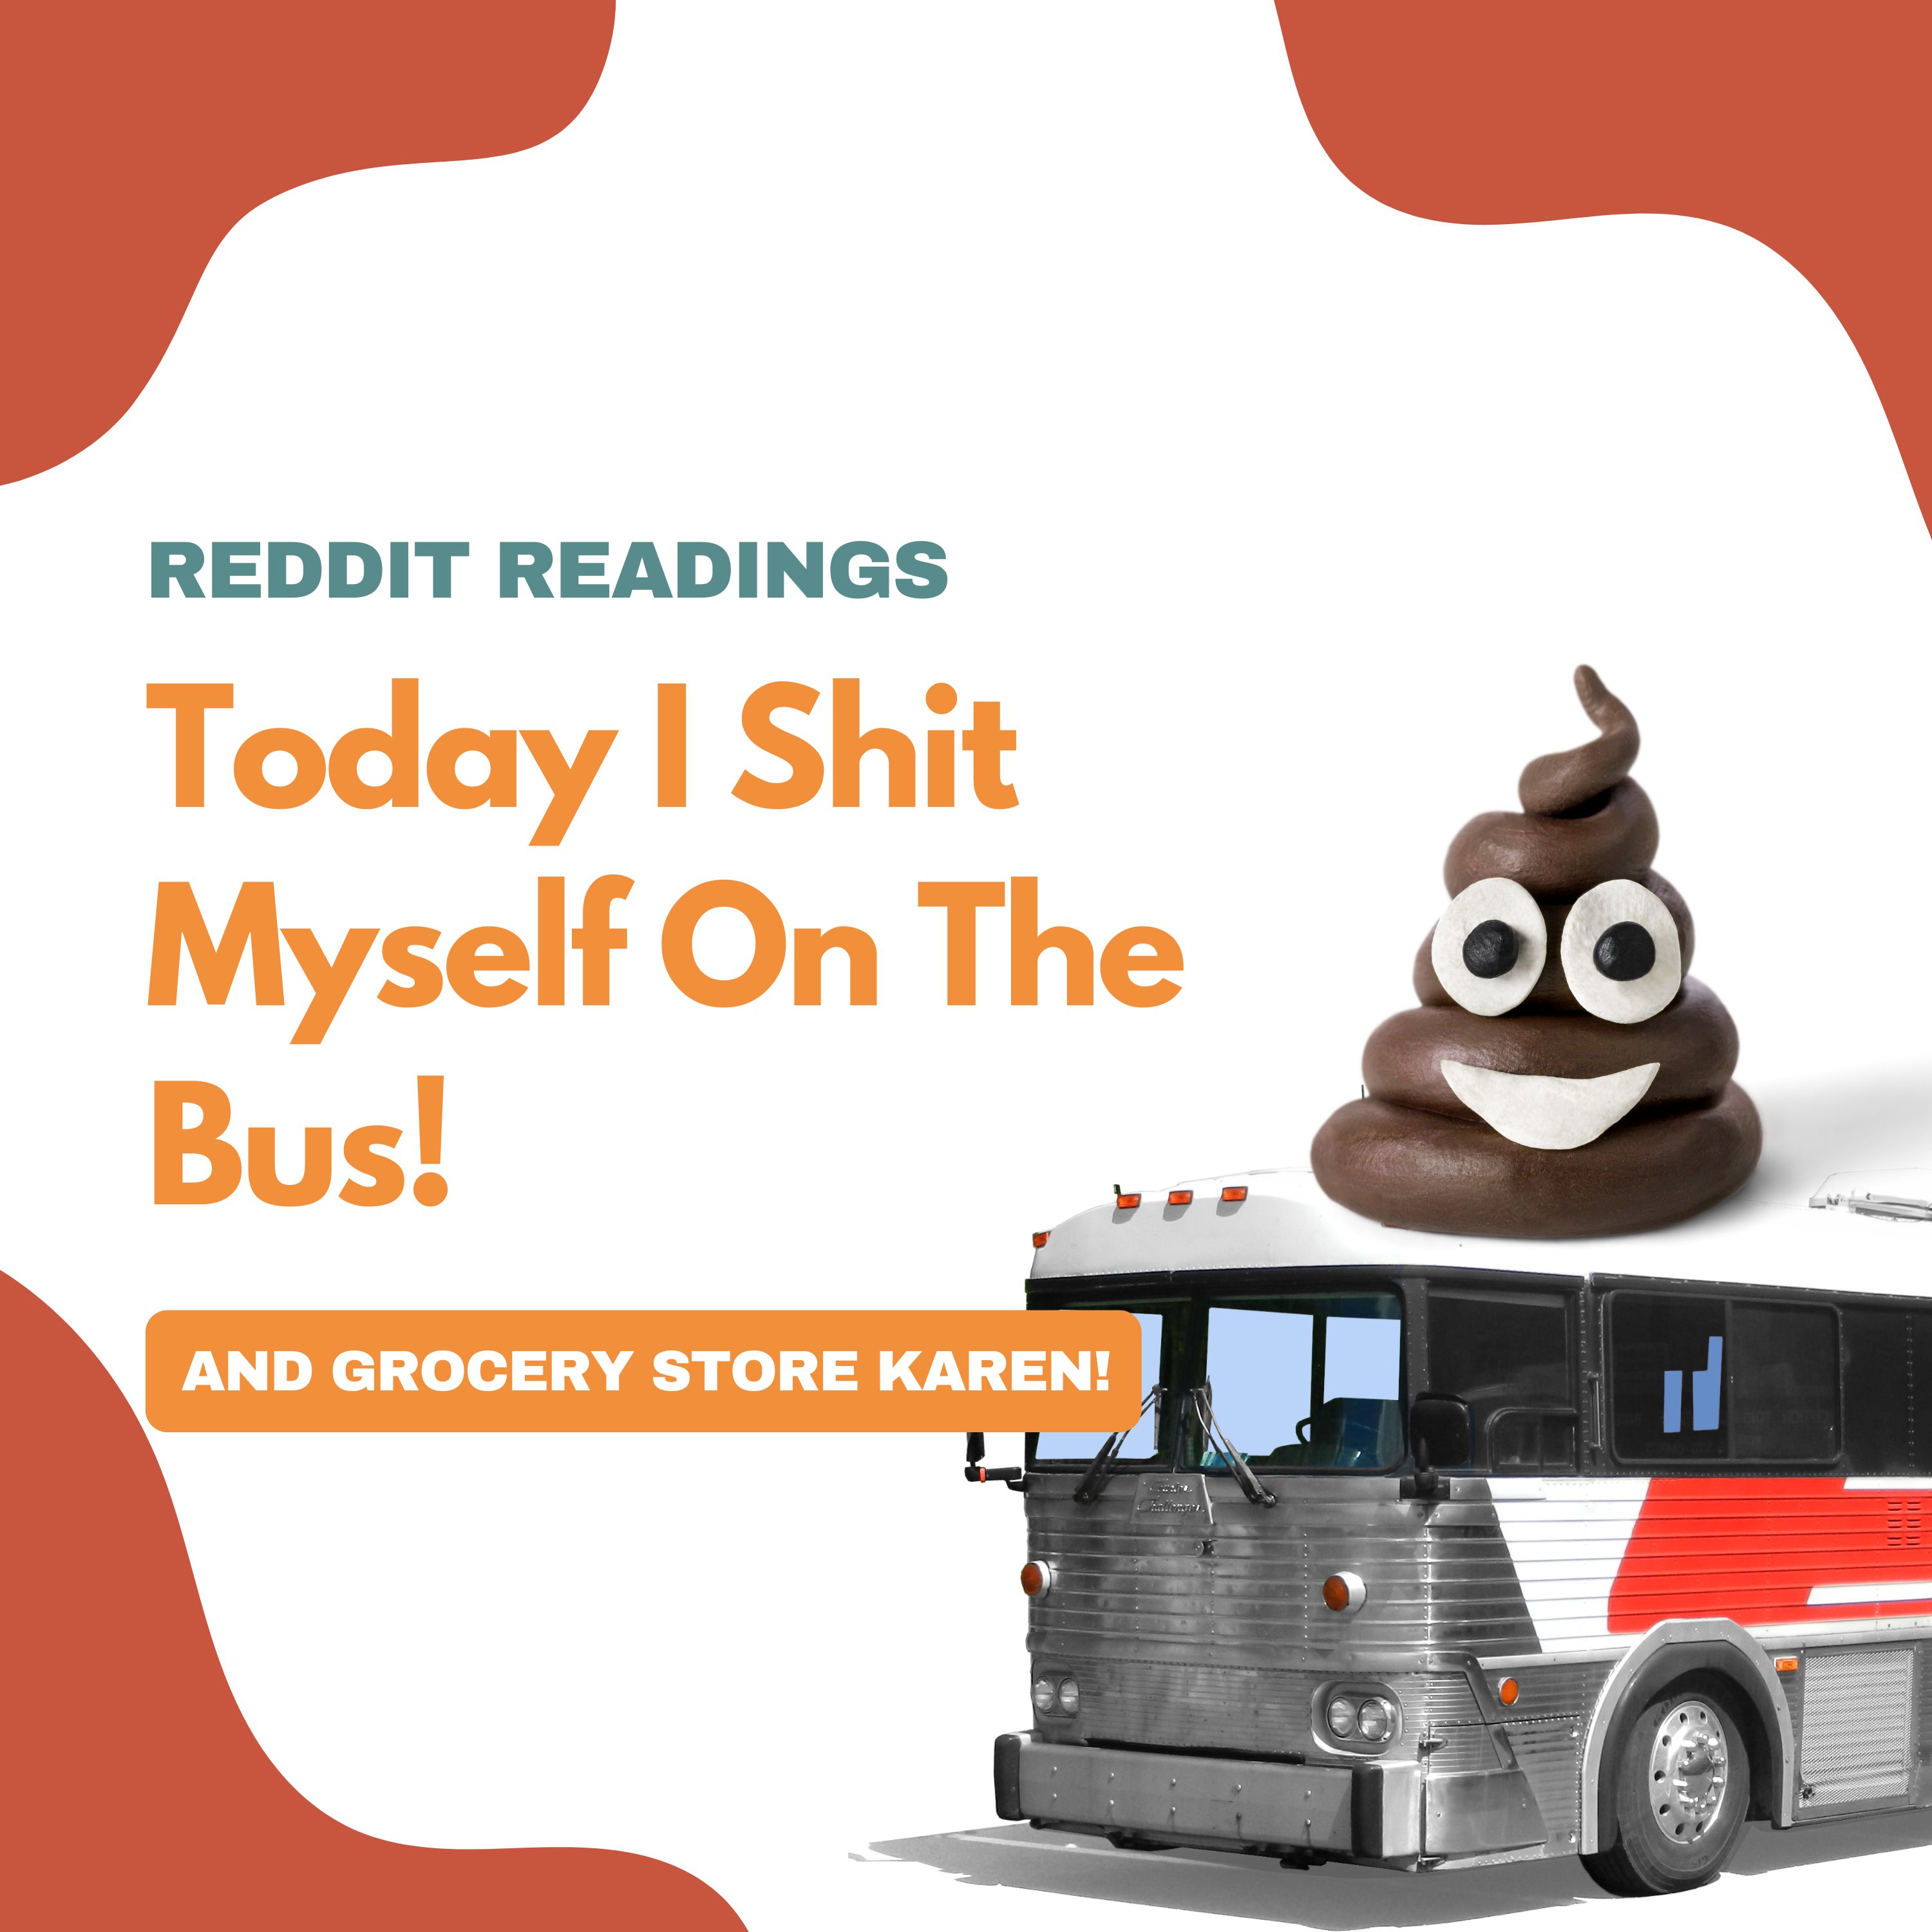 Reddit Readings | Today I Shit Myself On The Bus!